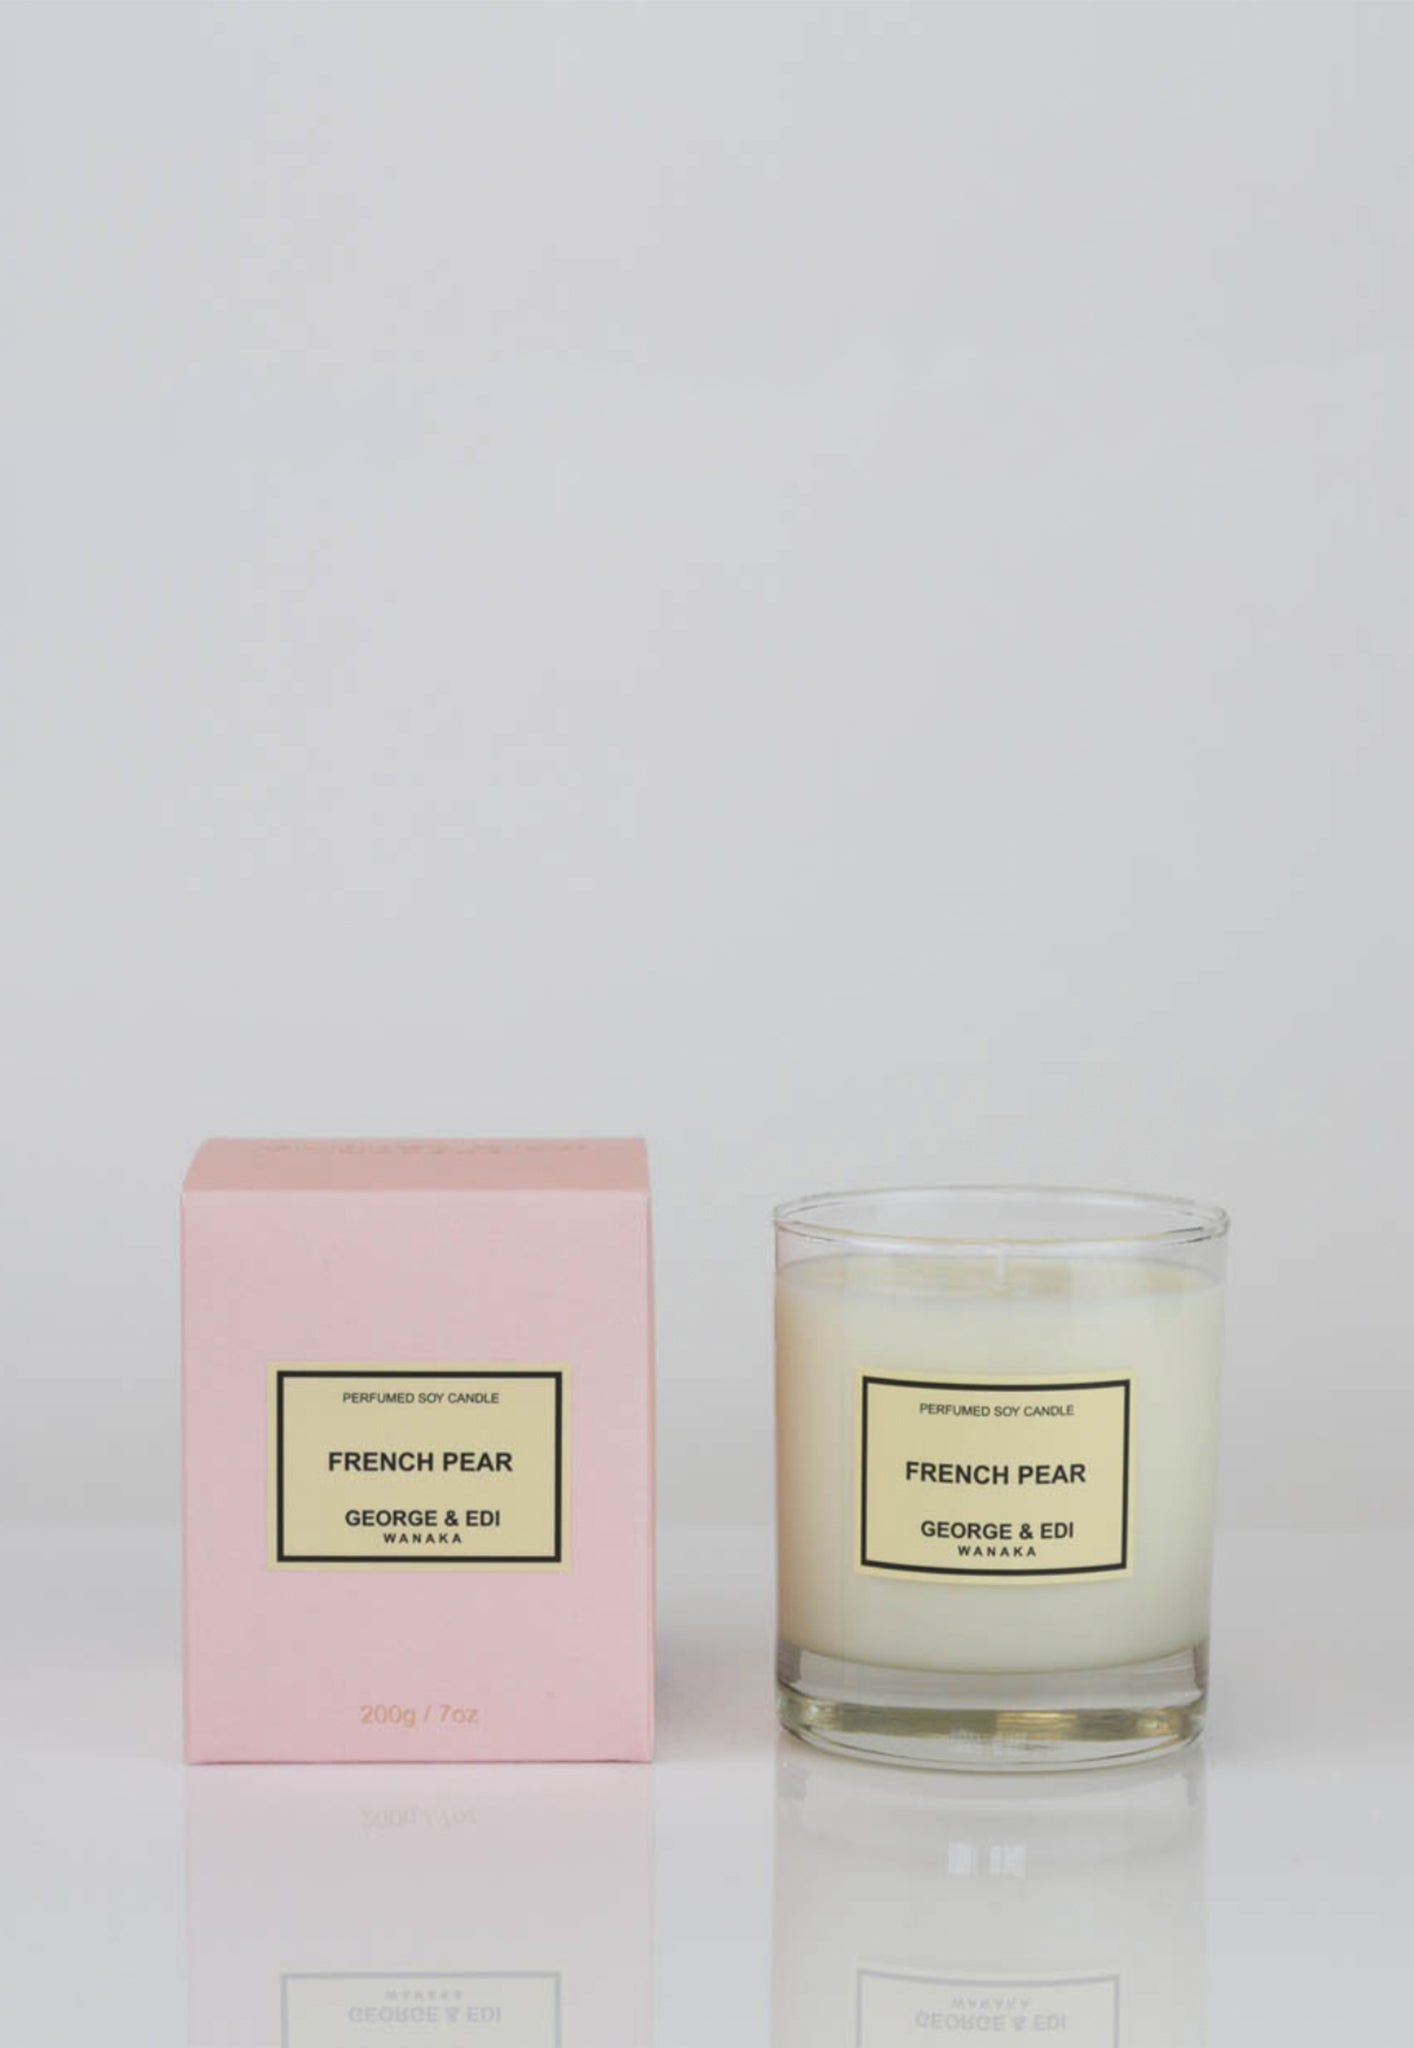 French Pear Perfumed Soy Candle sold by Angel Divine